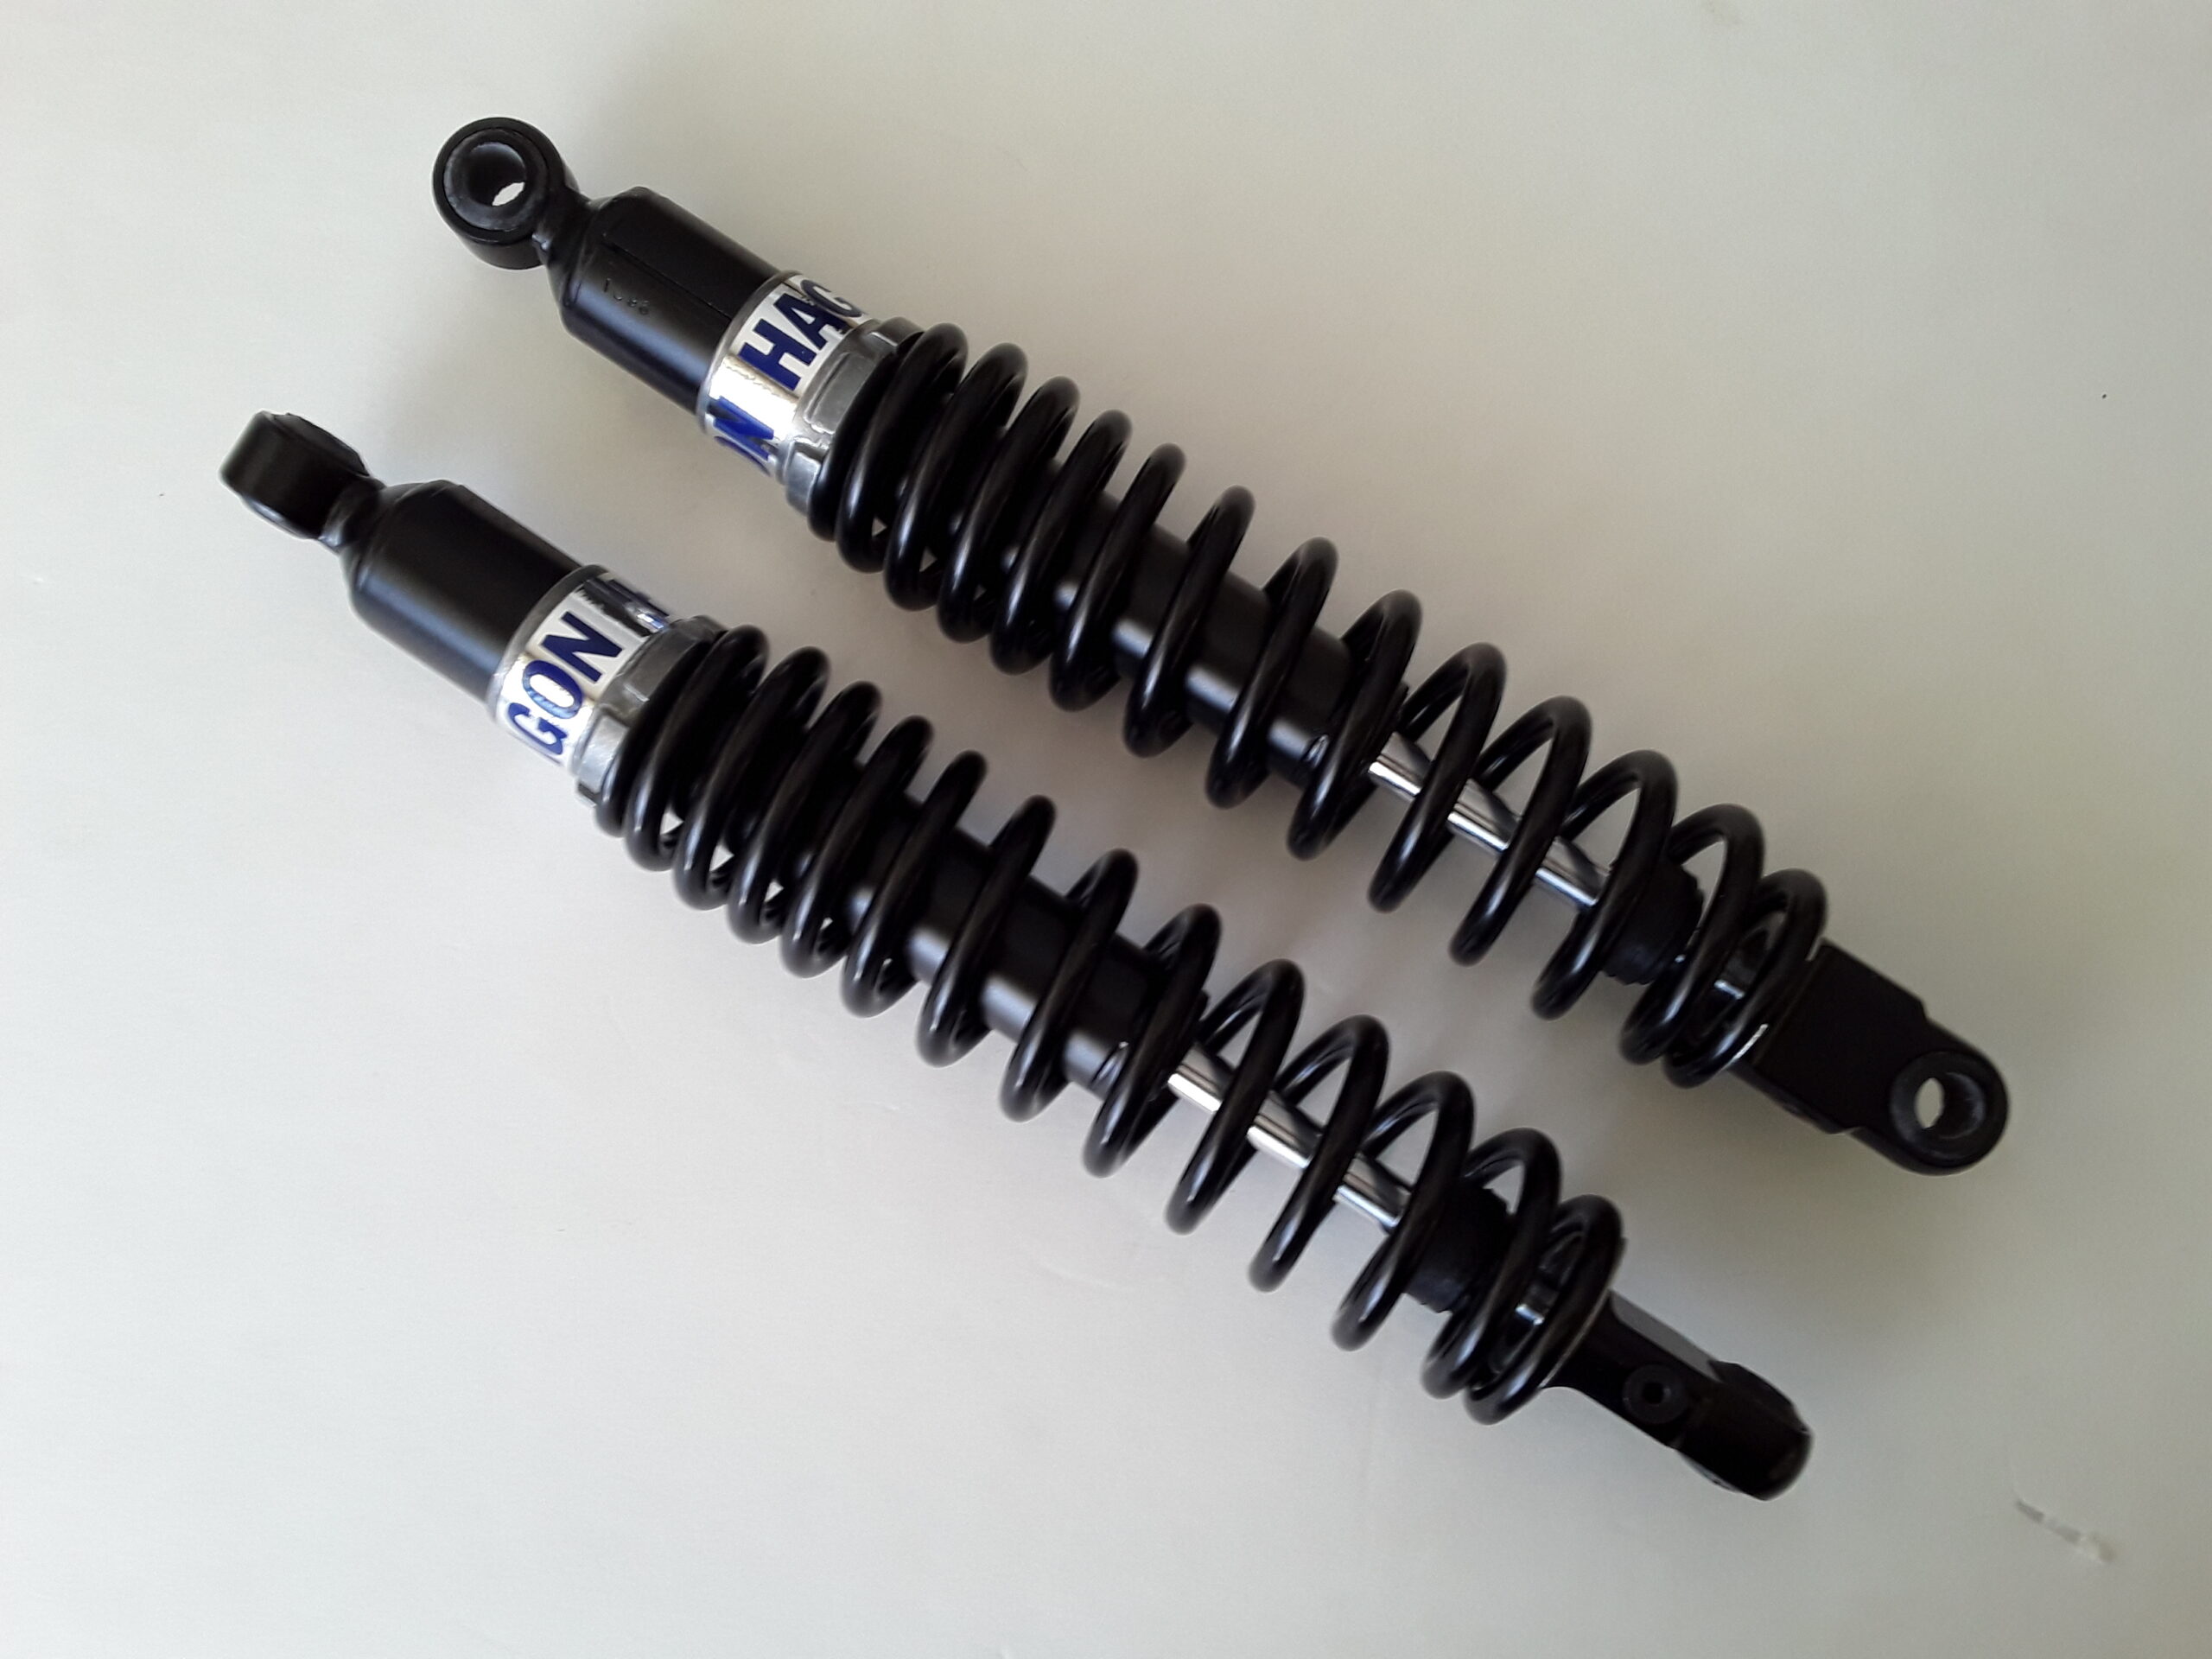 Hagon Shocks Review - Why Upgrade Your Shock Absorbers